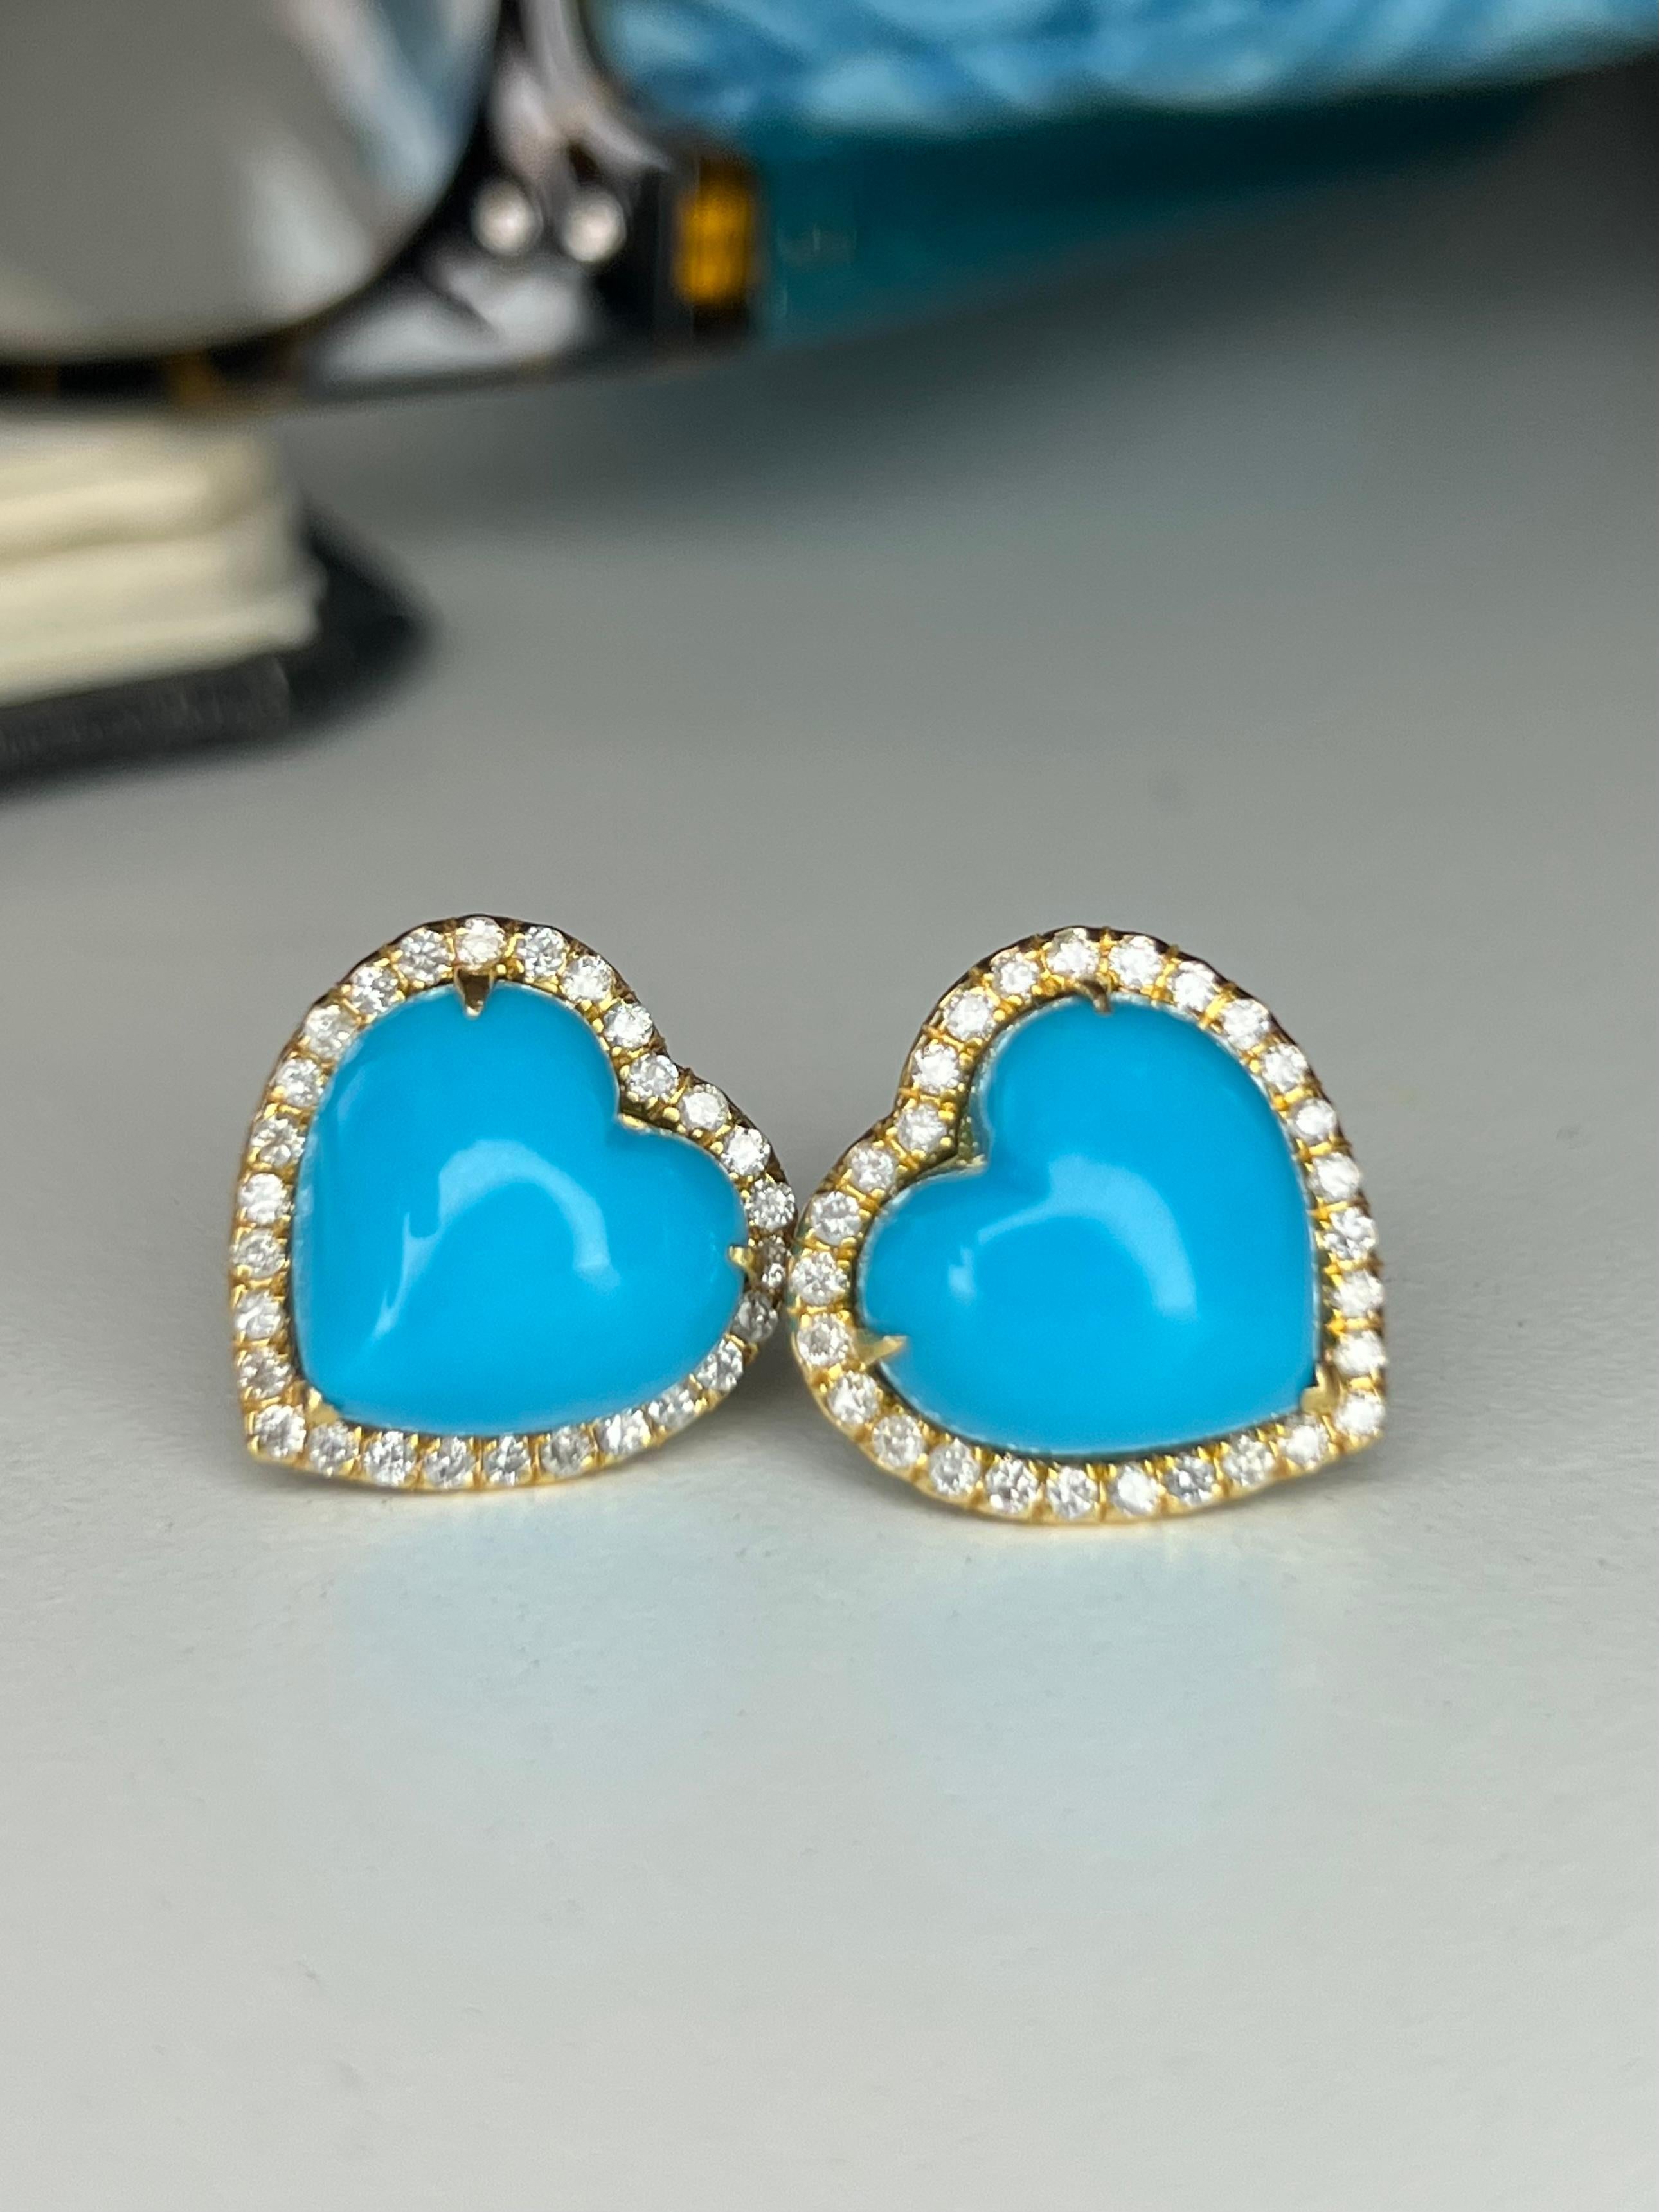 18K yellow gold and diamond earring featuring bubblegum heart shaped, sleeping beauty  turquoise. 

Features
18K yellow gold
.50 carat total weight in diamonds
10.46 carat total weight sleeping beauty turquoise
Post earrings includes monster backs